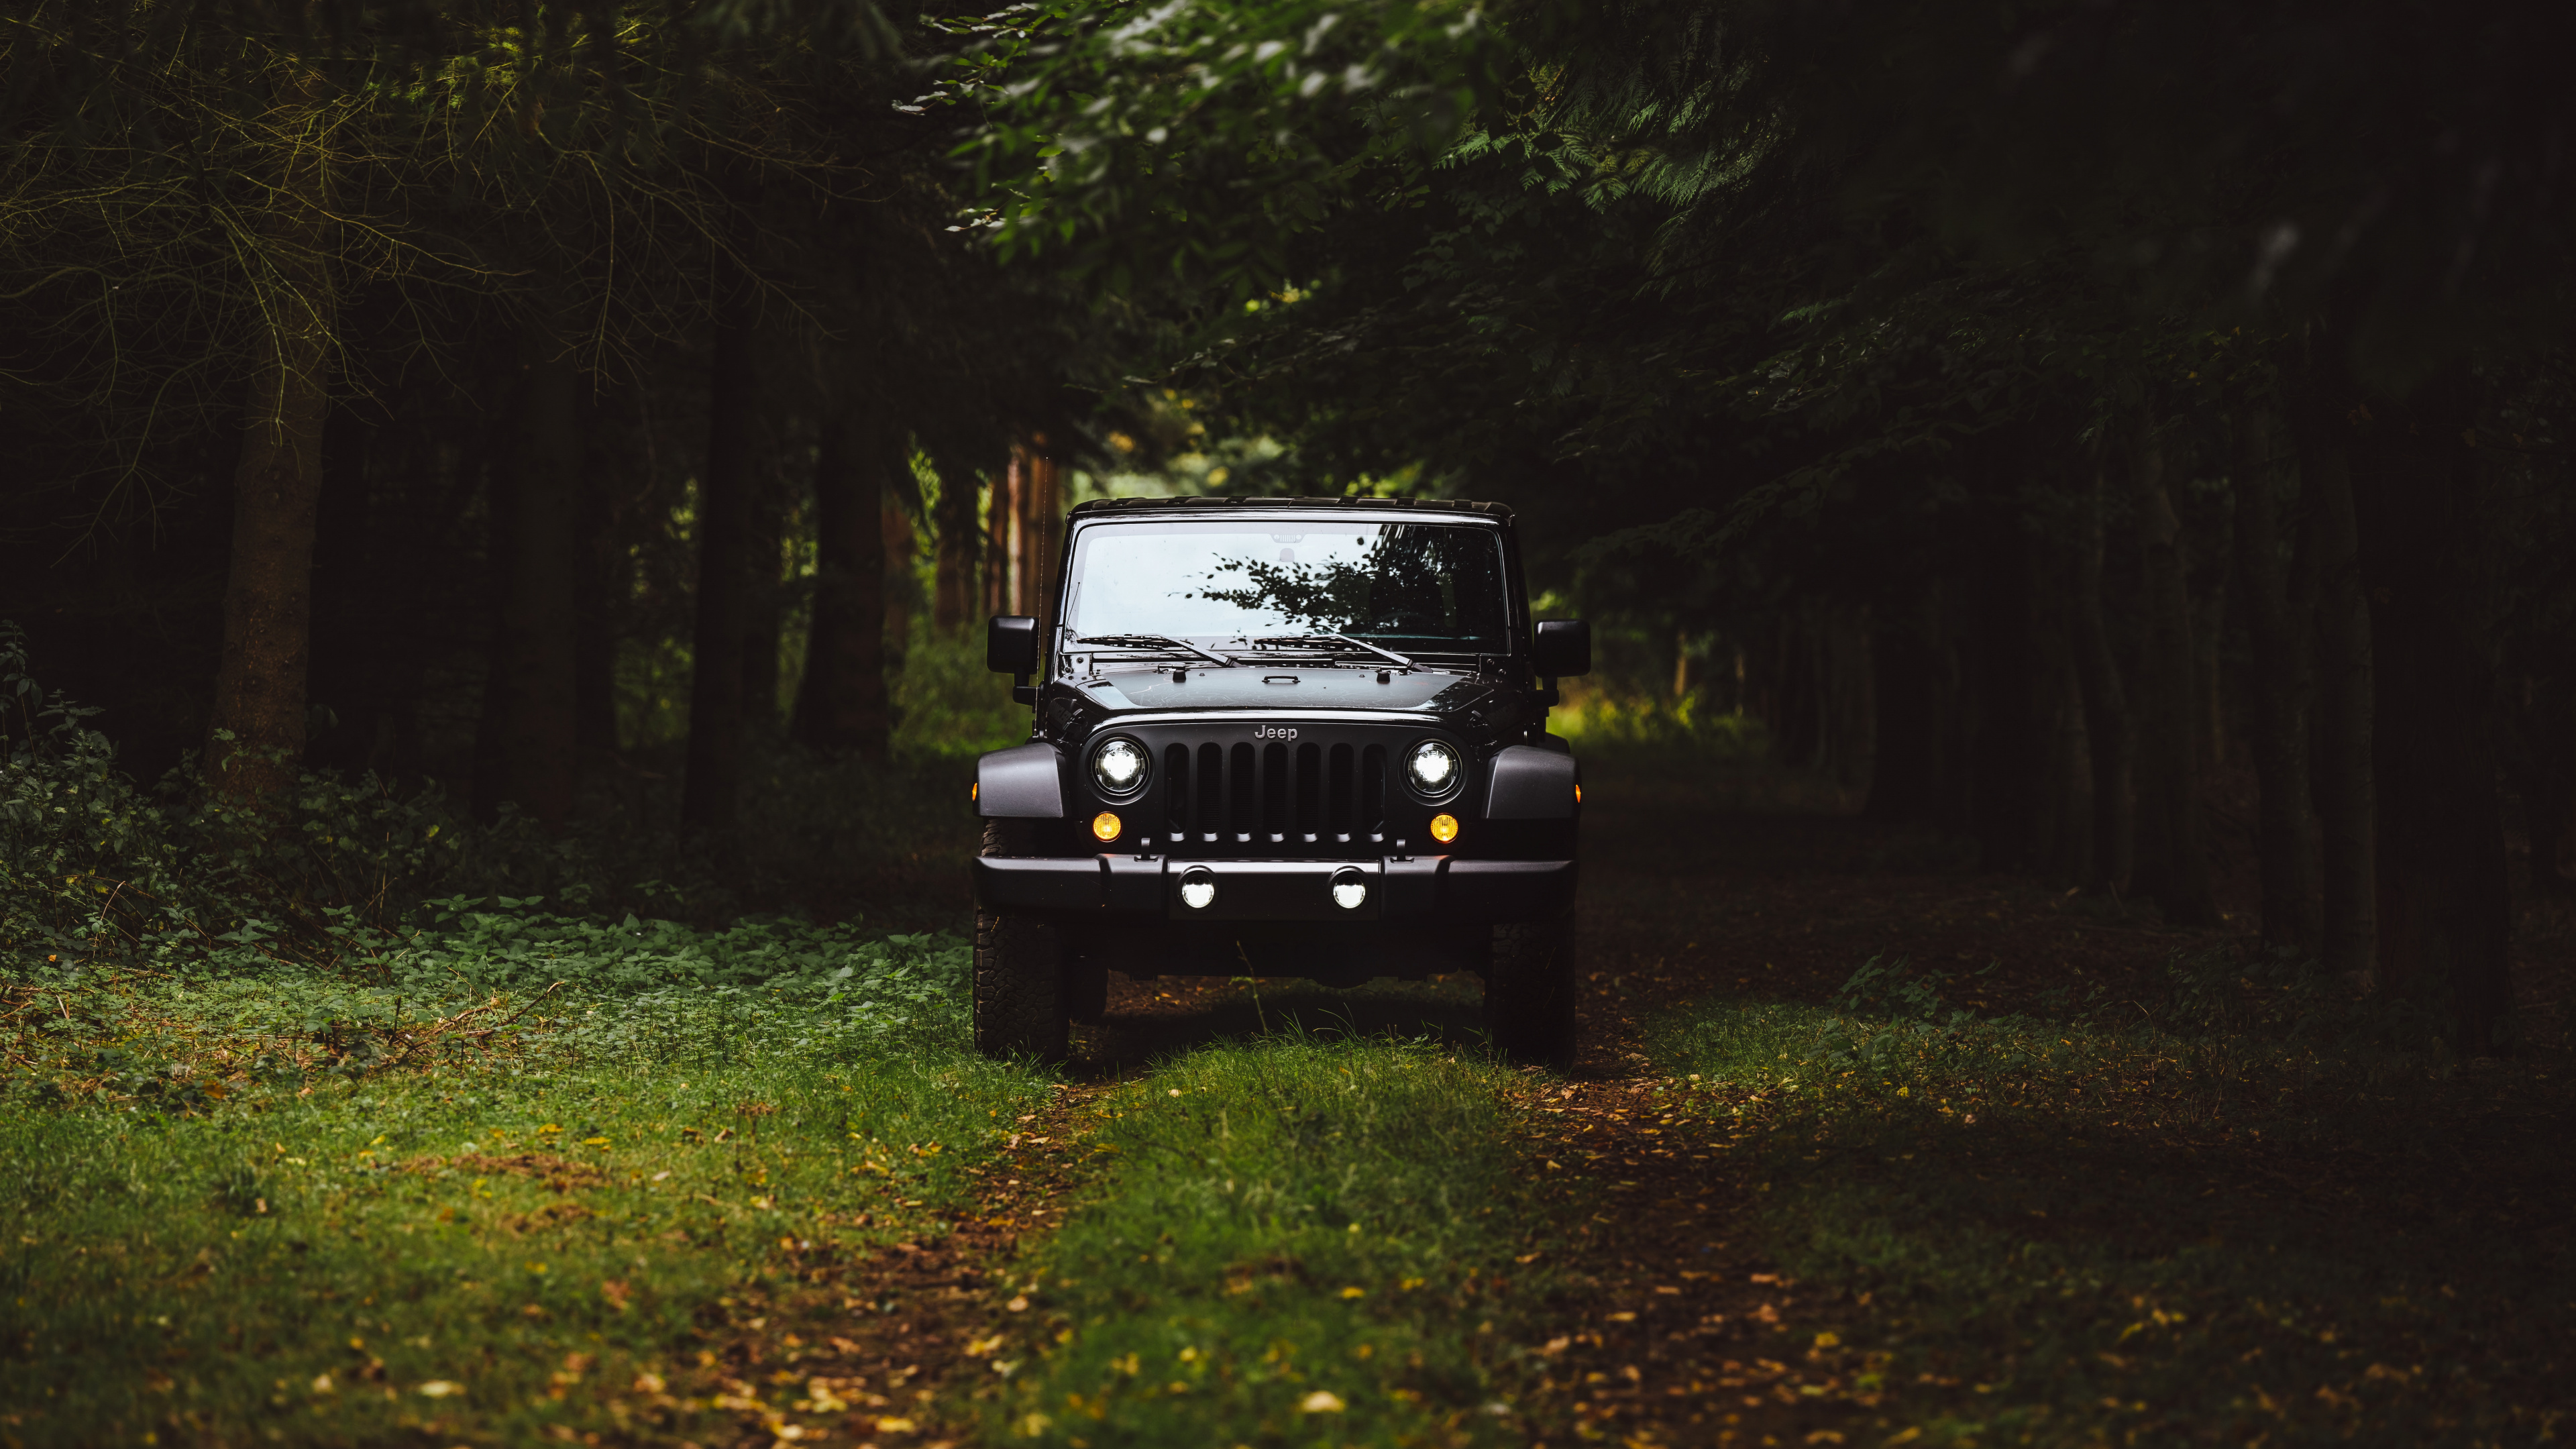 Black Jeep Wrangler on Green Grass Field Surrounded by Green Trees During Daytime. Wallpaper in 3840x2160 Resolution